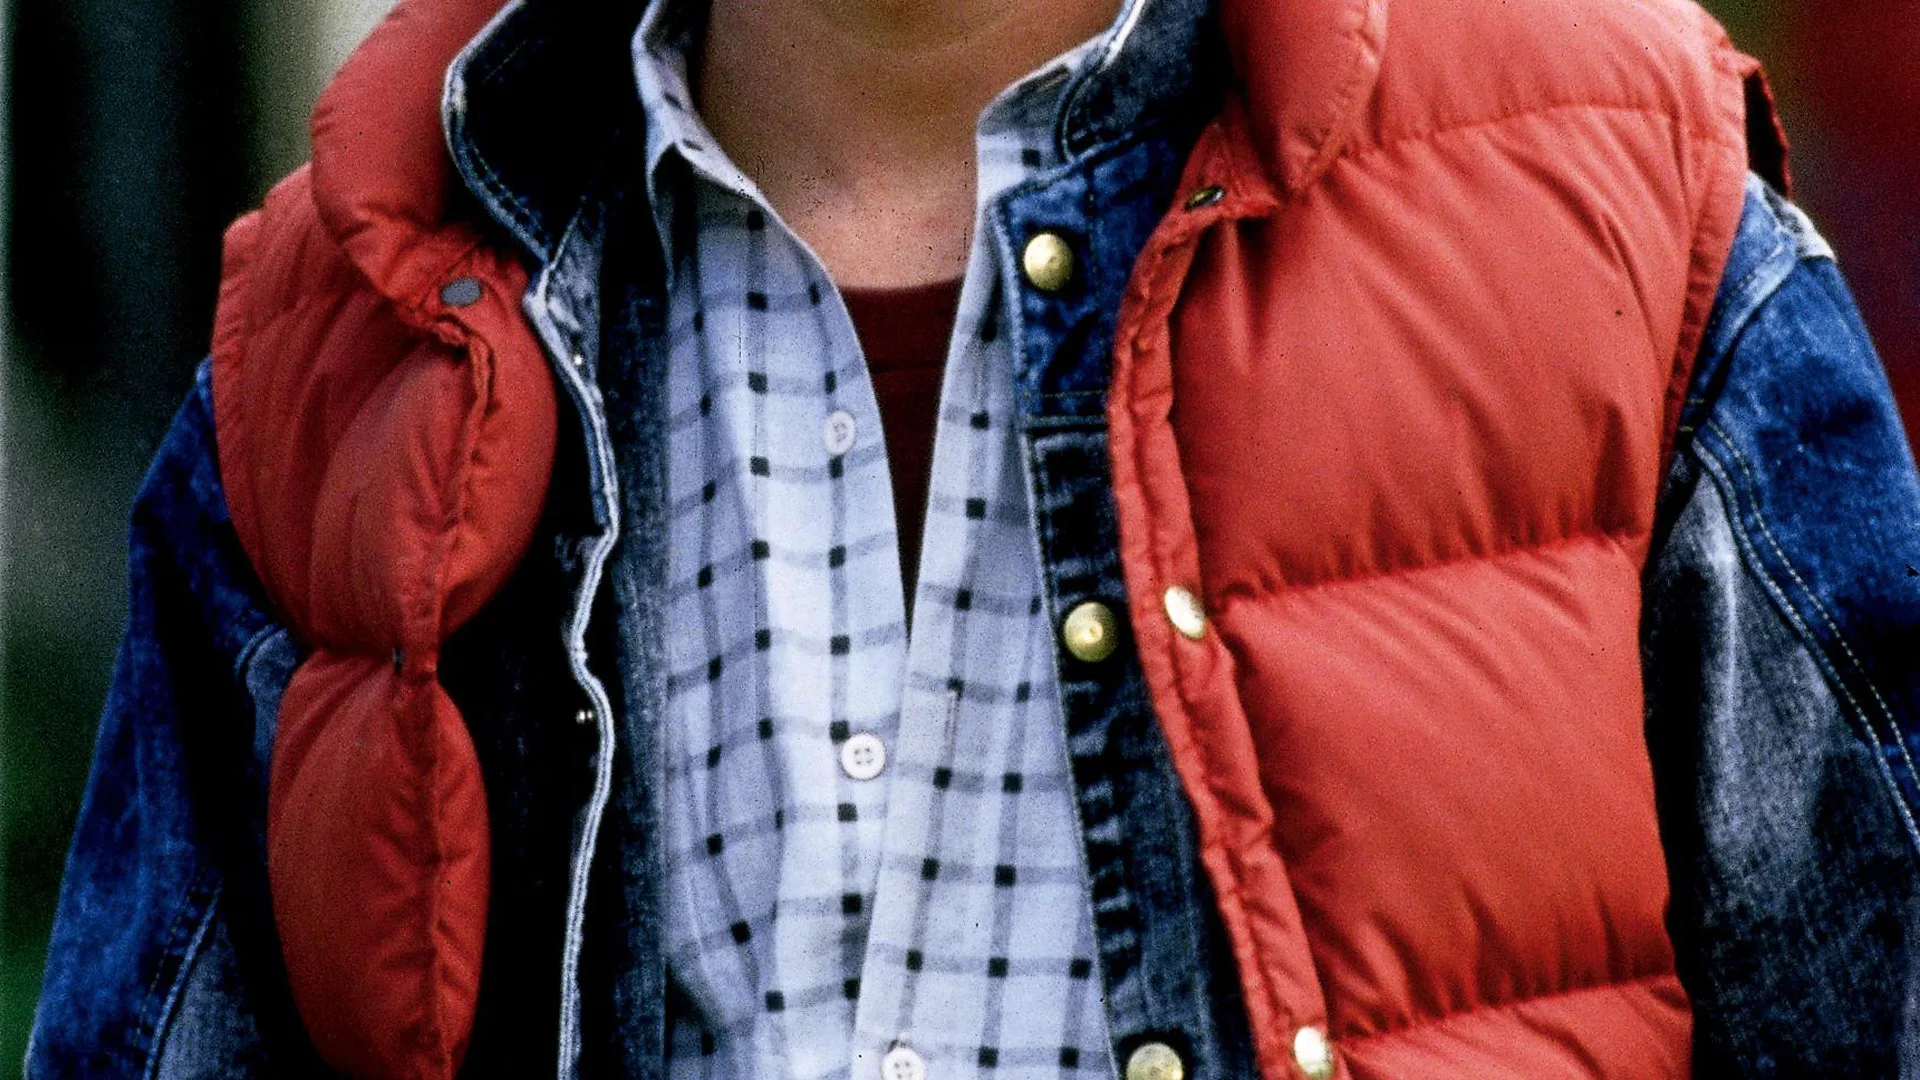 A photograph of a man wearing a red gilet and blue and grey plaid shirt